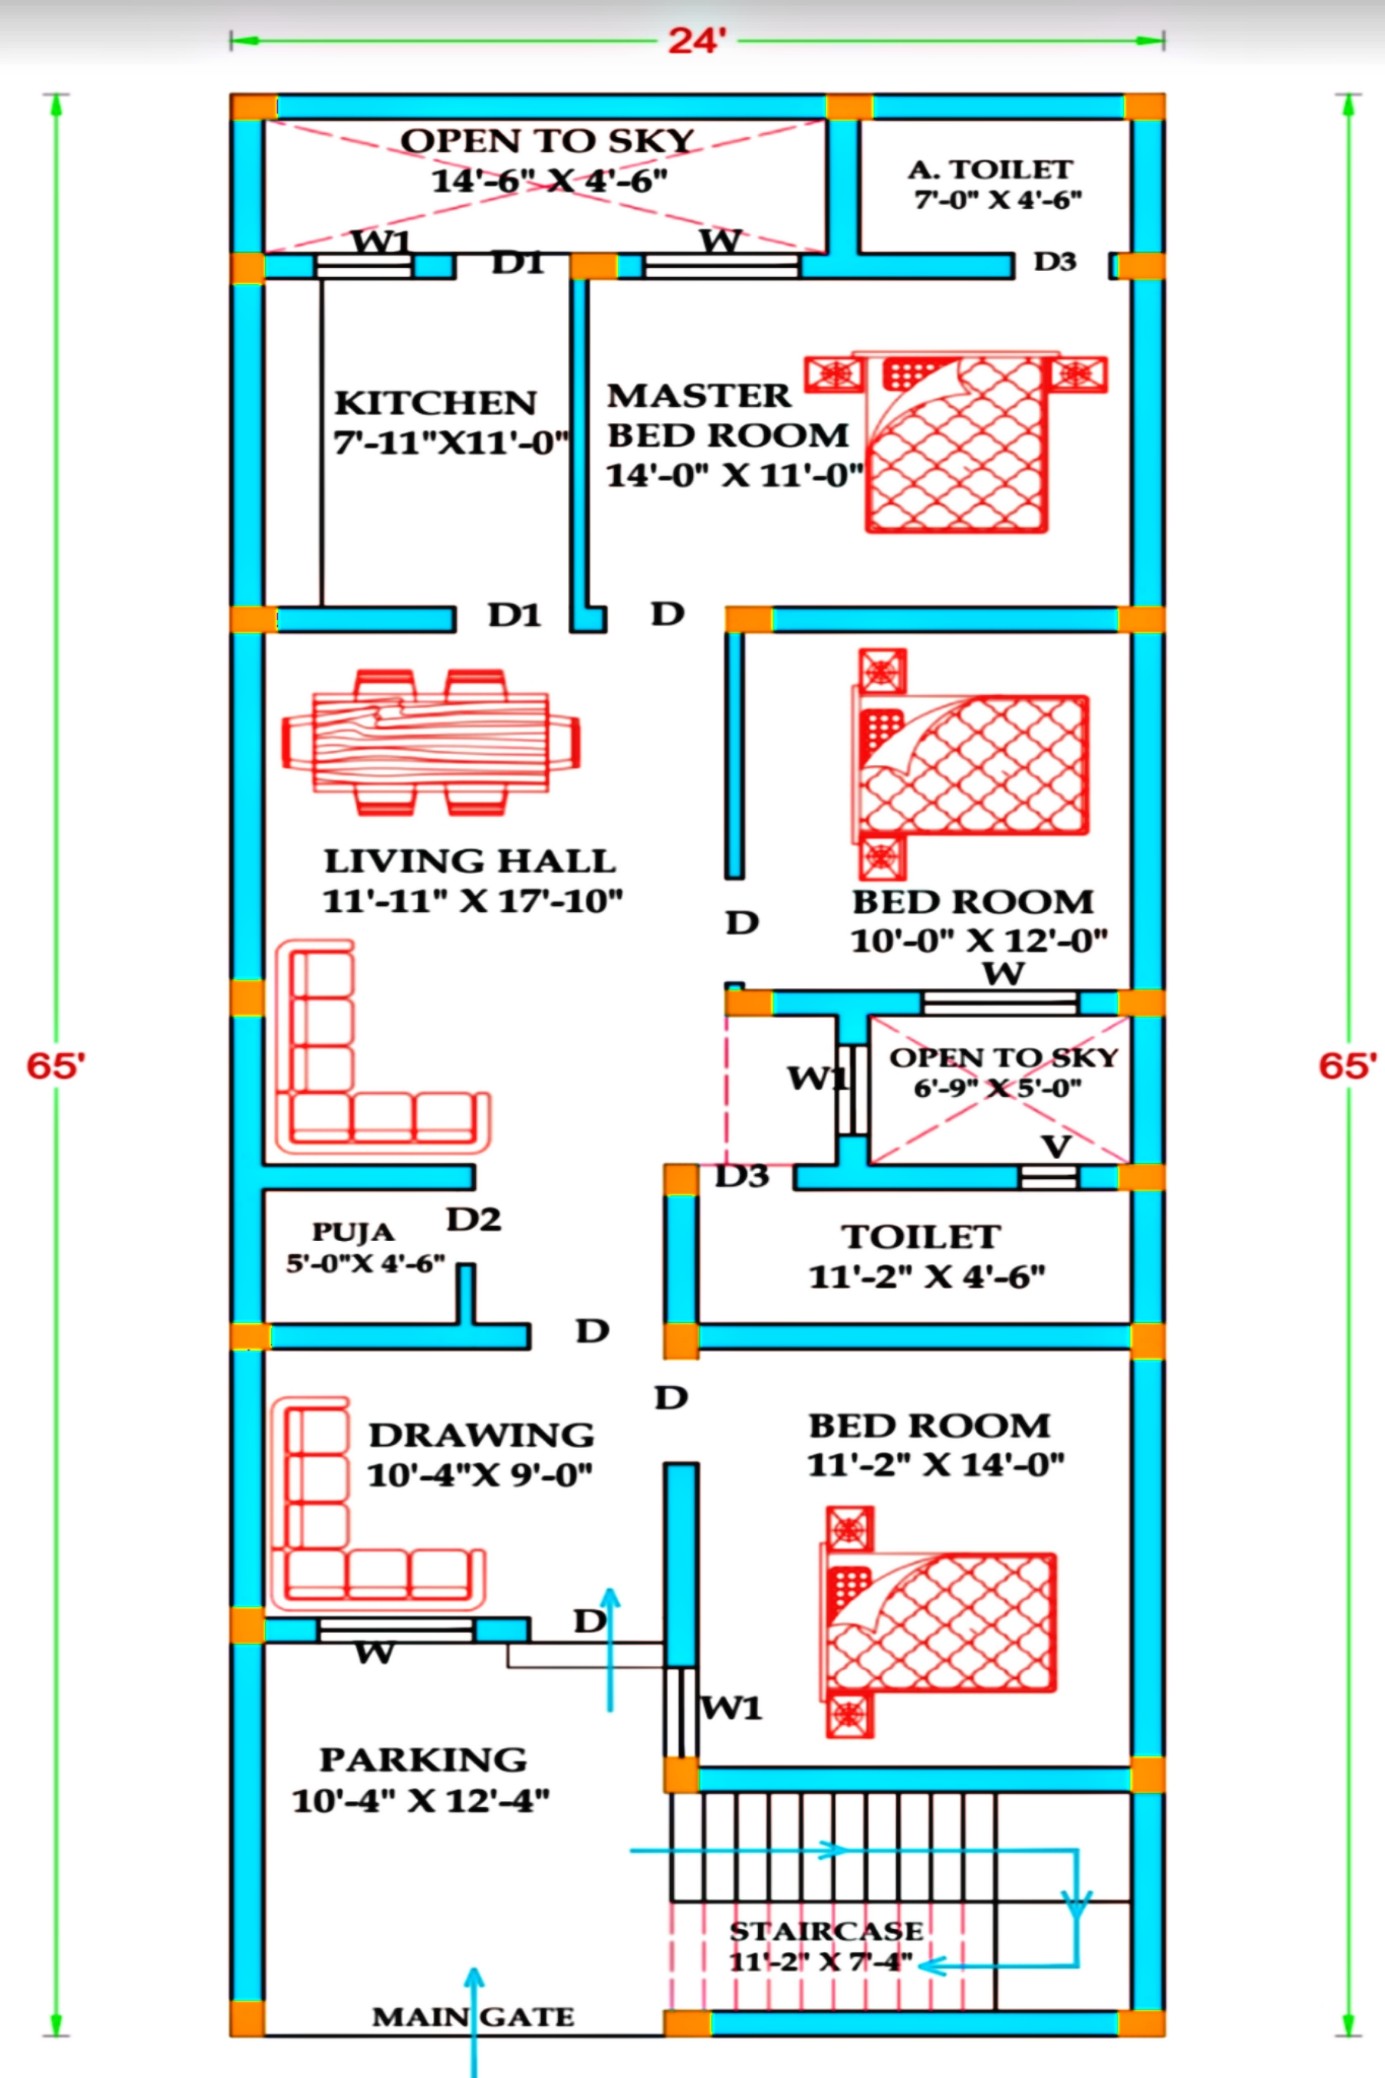 North face house plan 3bhk